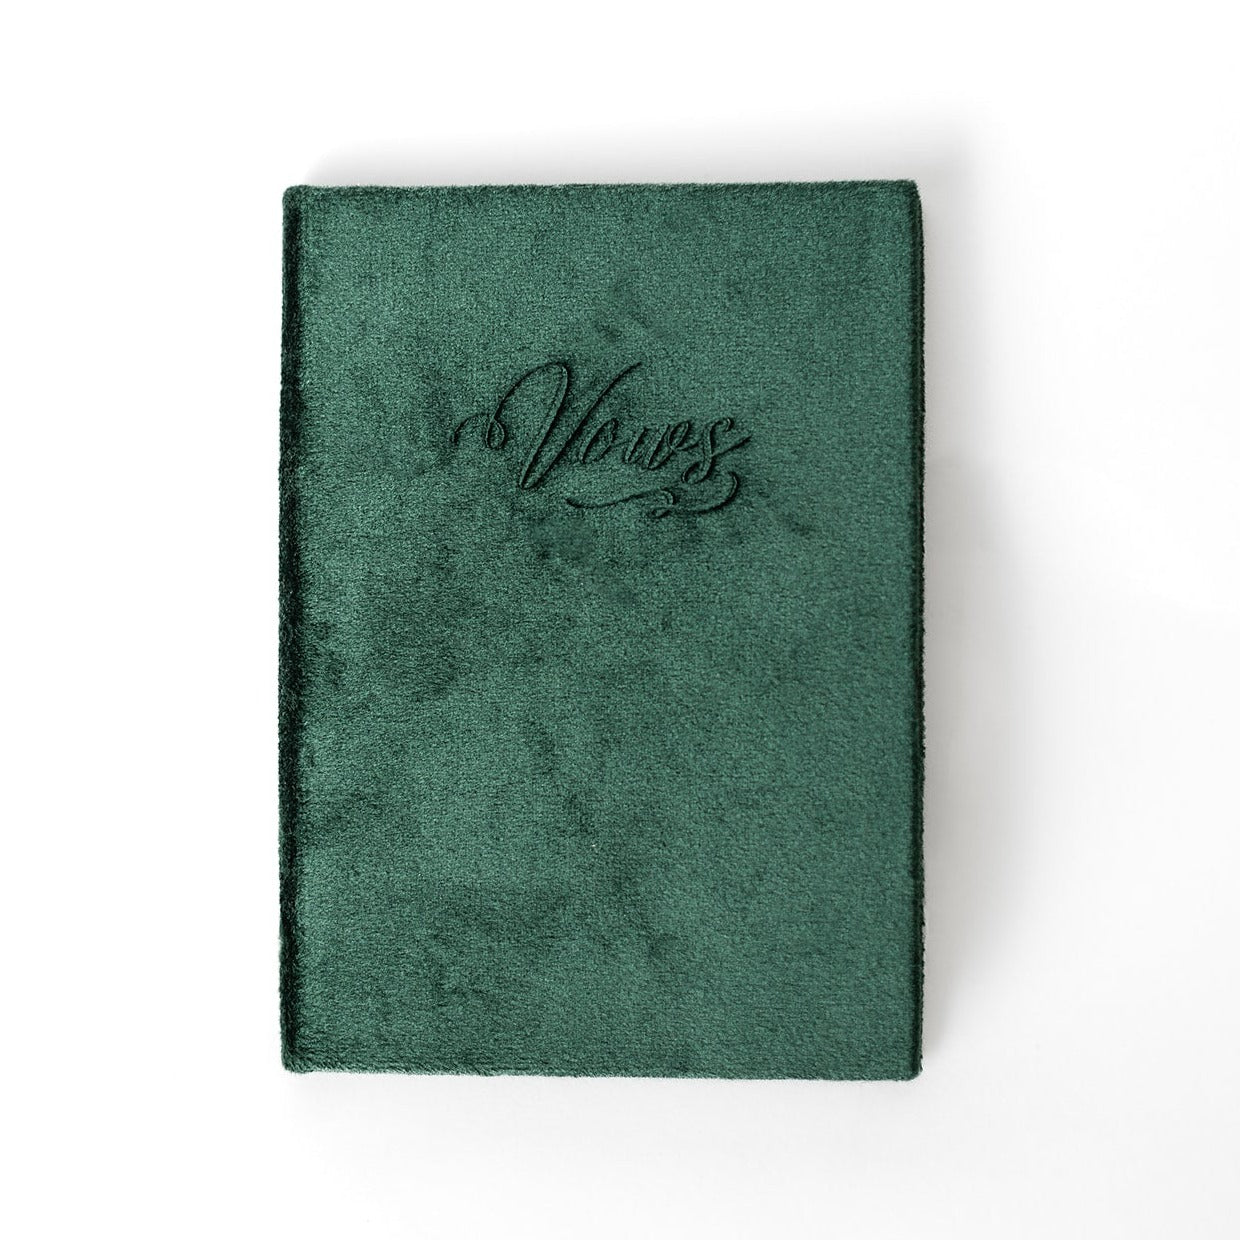 An emerald vow book with the word "Vows" embossed on the front cover.